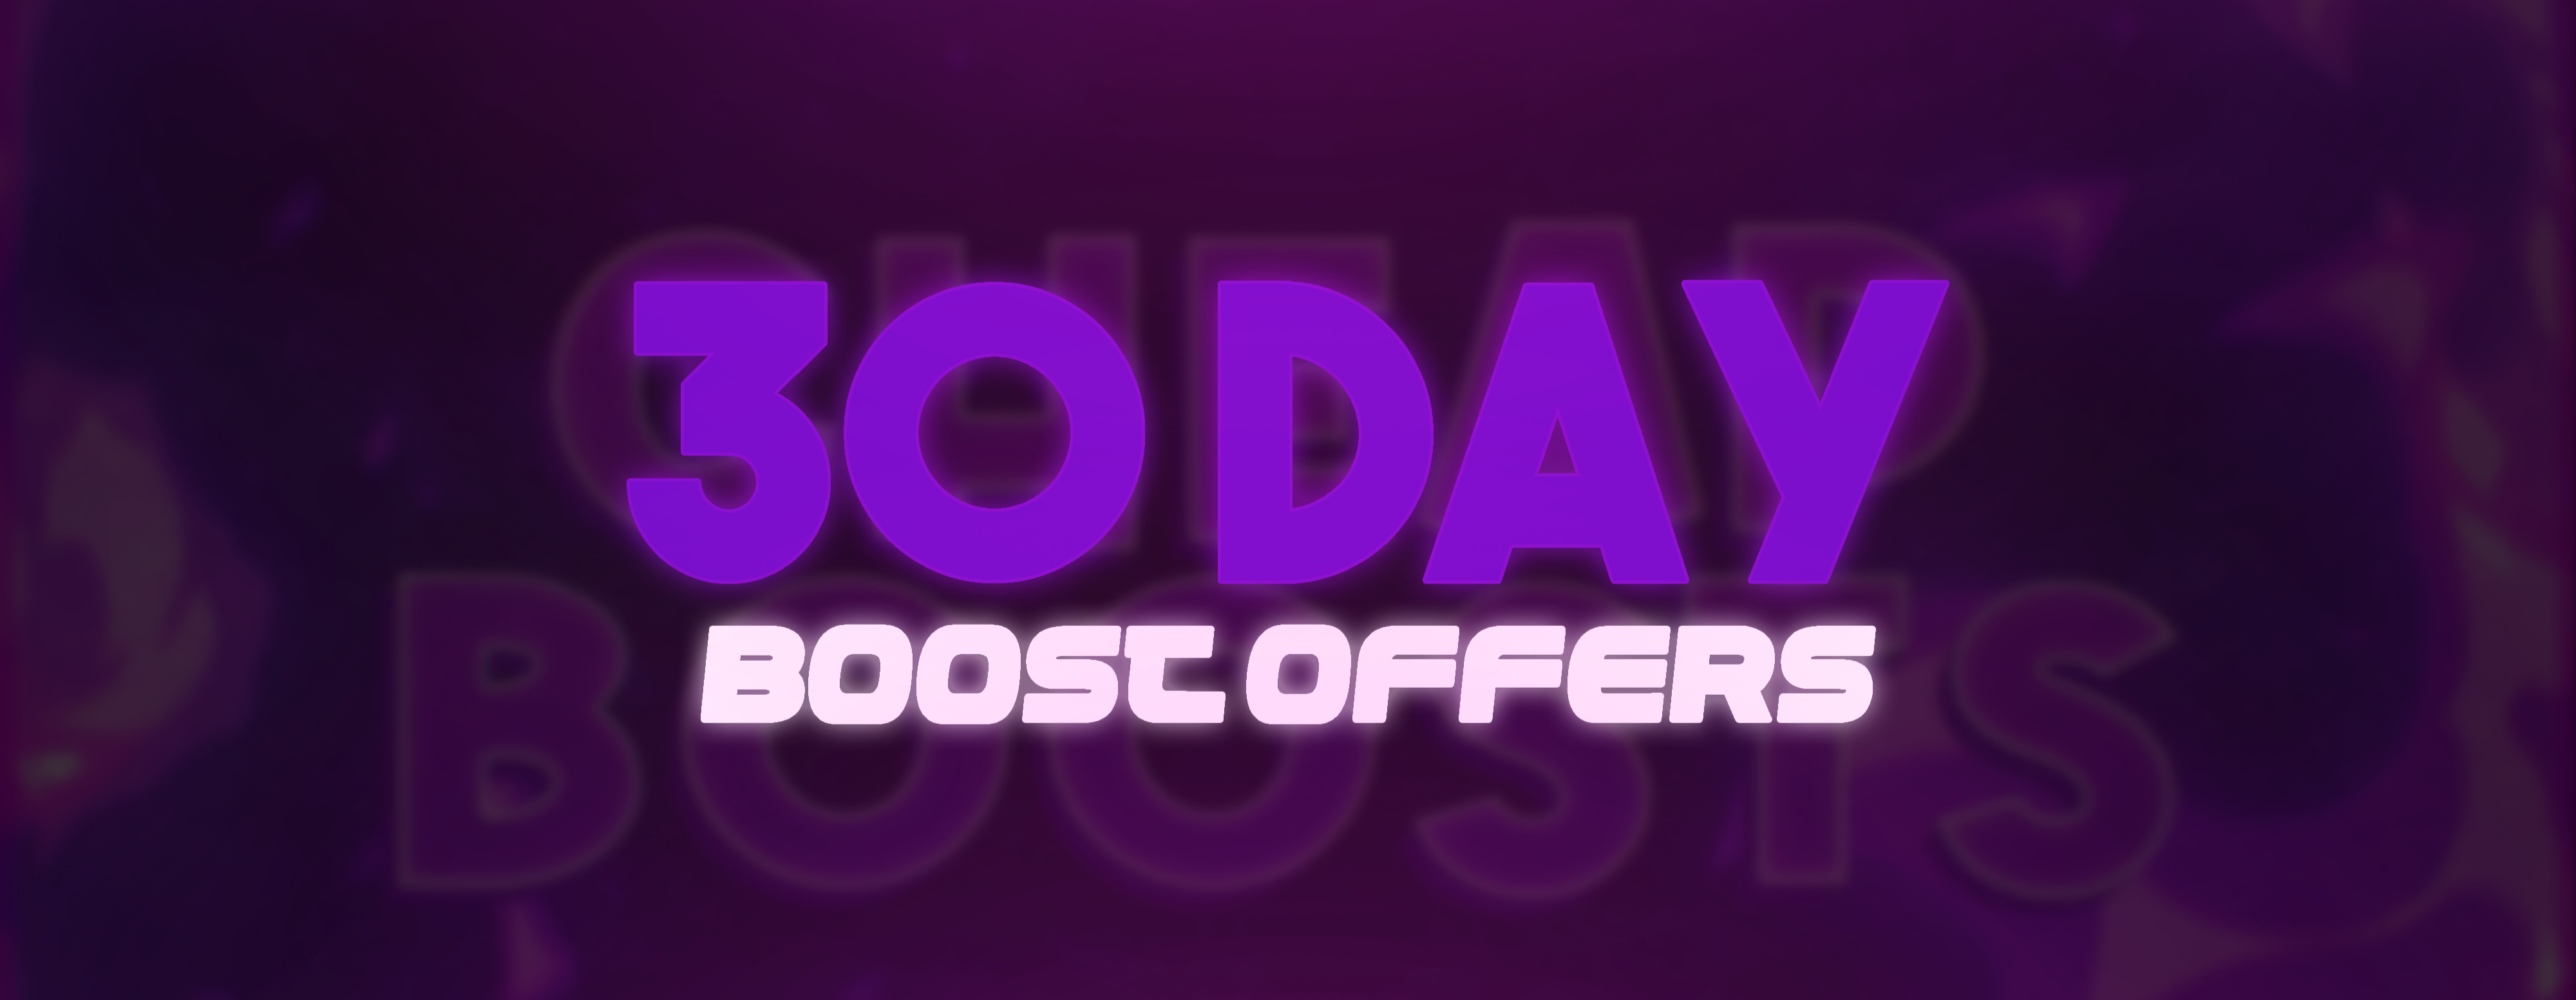 30 Day Boost Offers